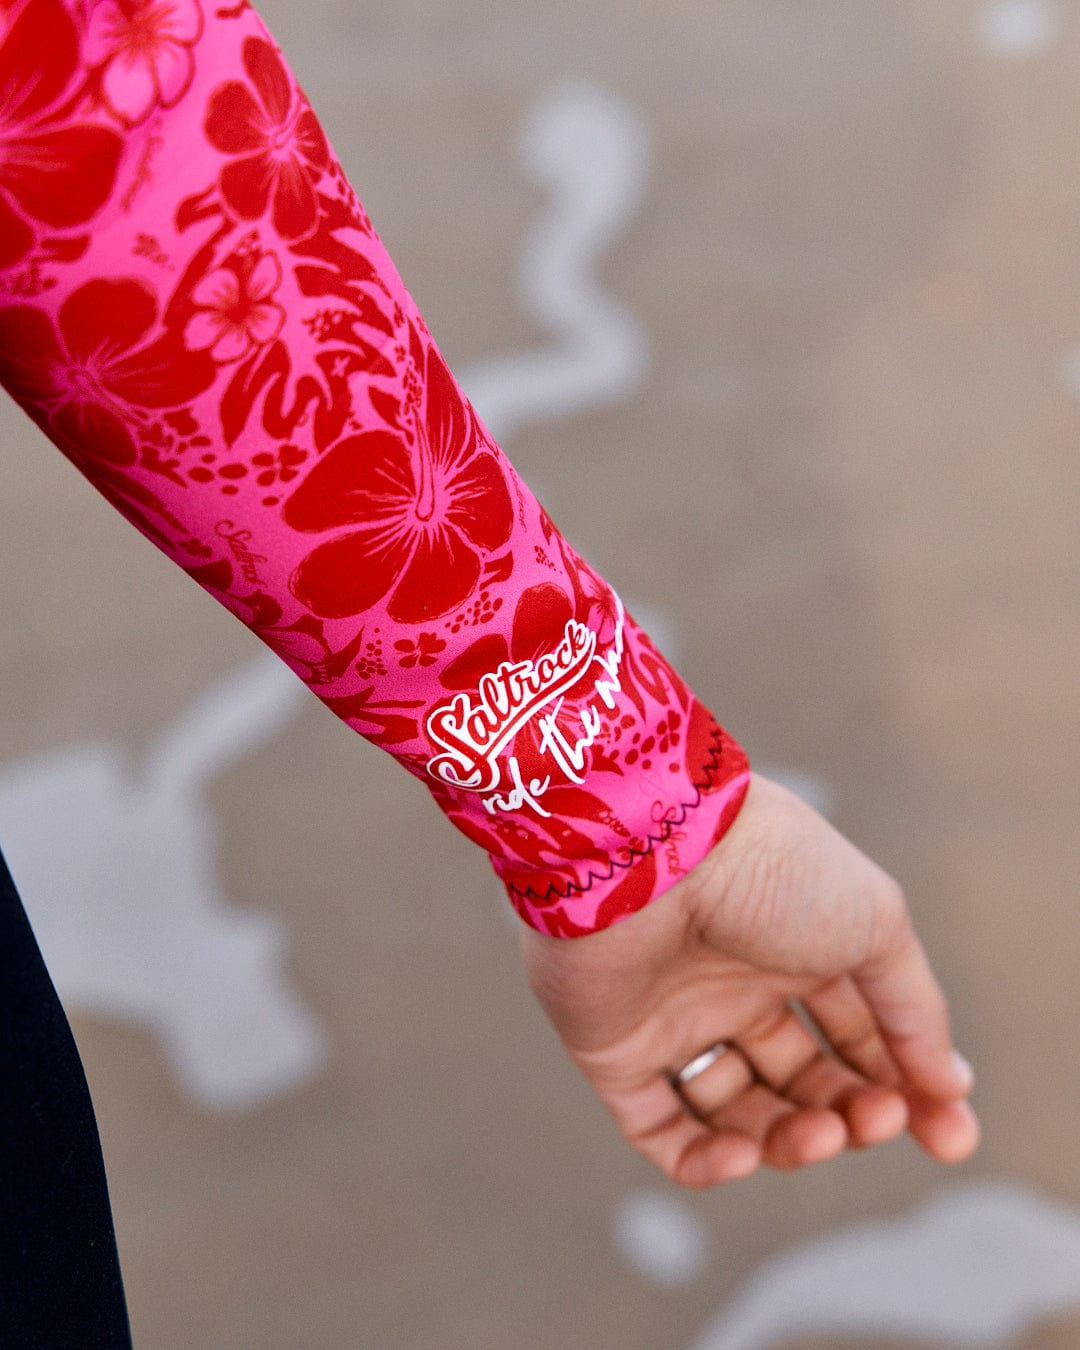 Close-up of an arm wearing a bright red neoprene wetsuit sleeve with Saltrock Hibiscus - Womens Full Wetsuit - Pink printed on it, against a sandy background.